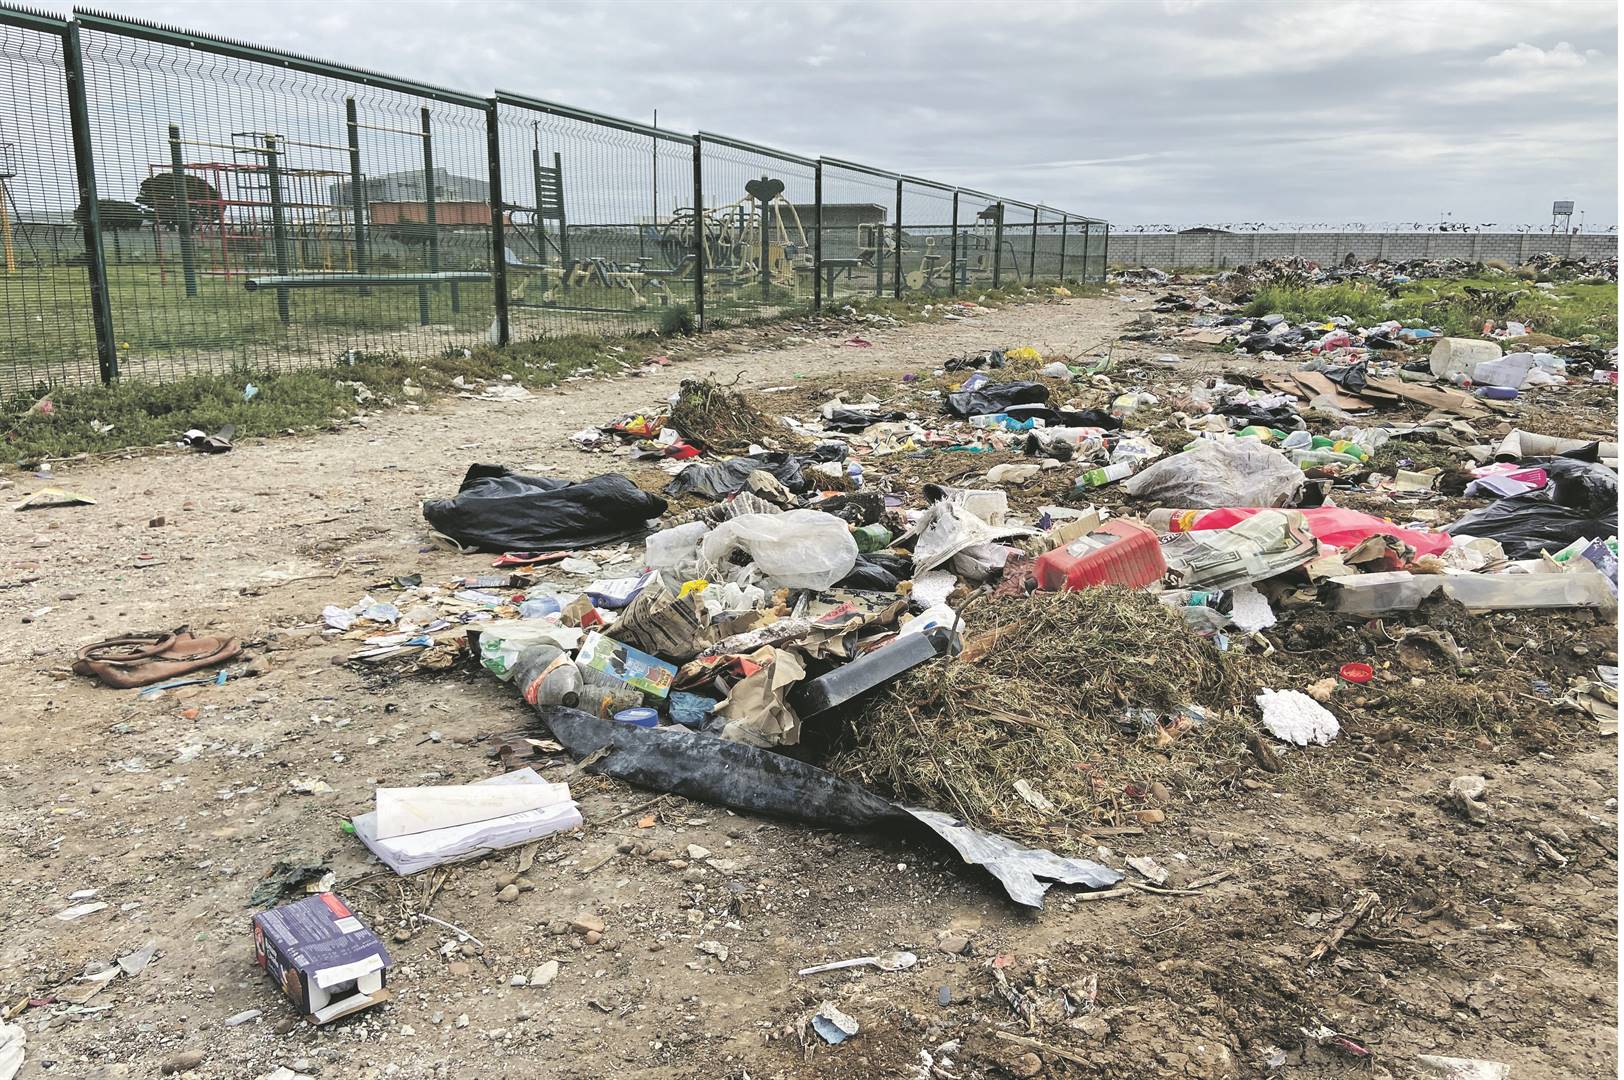 Heaps of rubbish clog the area as you drive through Fordville and other townships in Nelson Mandela Bay. Residents say they won’t vote this year because nothing changes. Photo: Bongekile Macupe